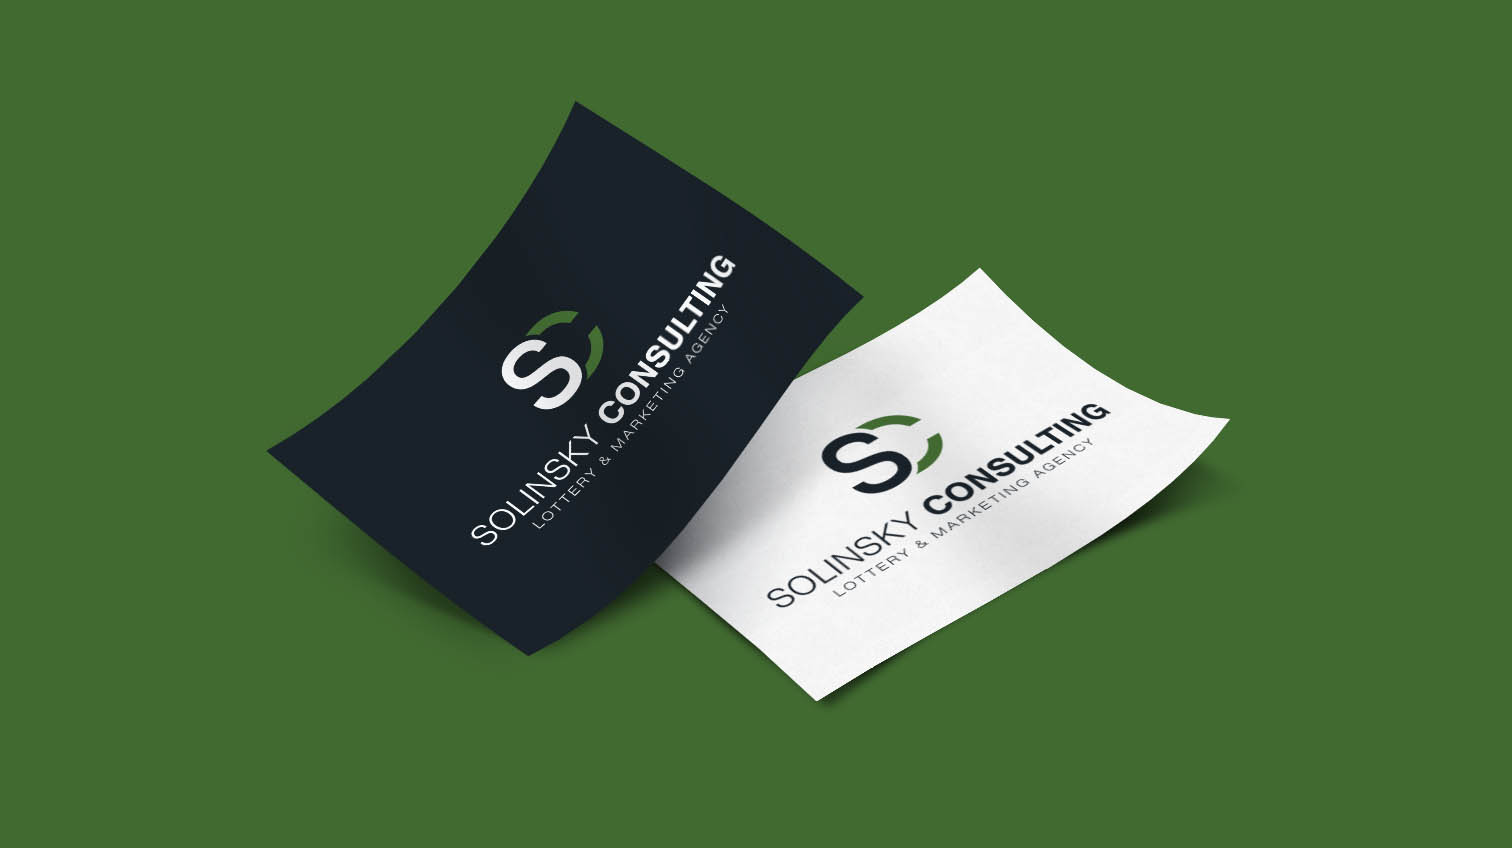 Two Solinsky Consulting logo cards in a dark and a light background